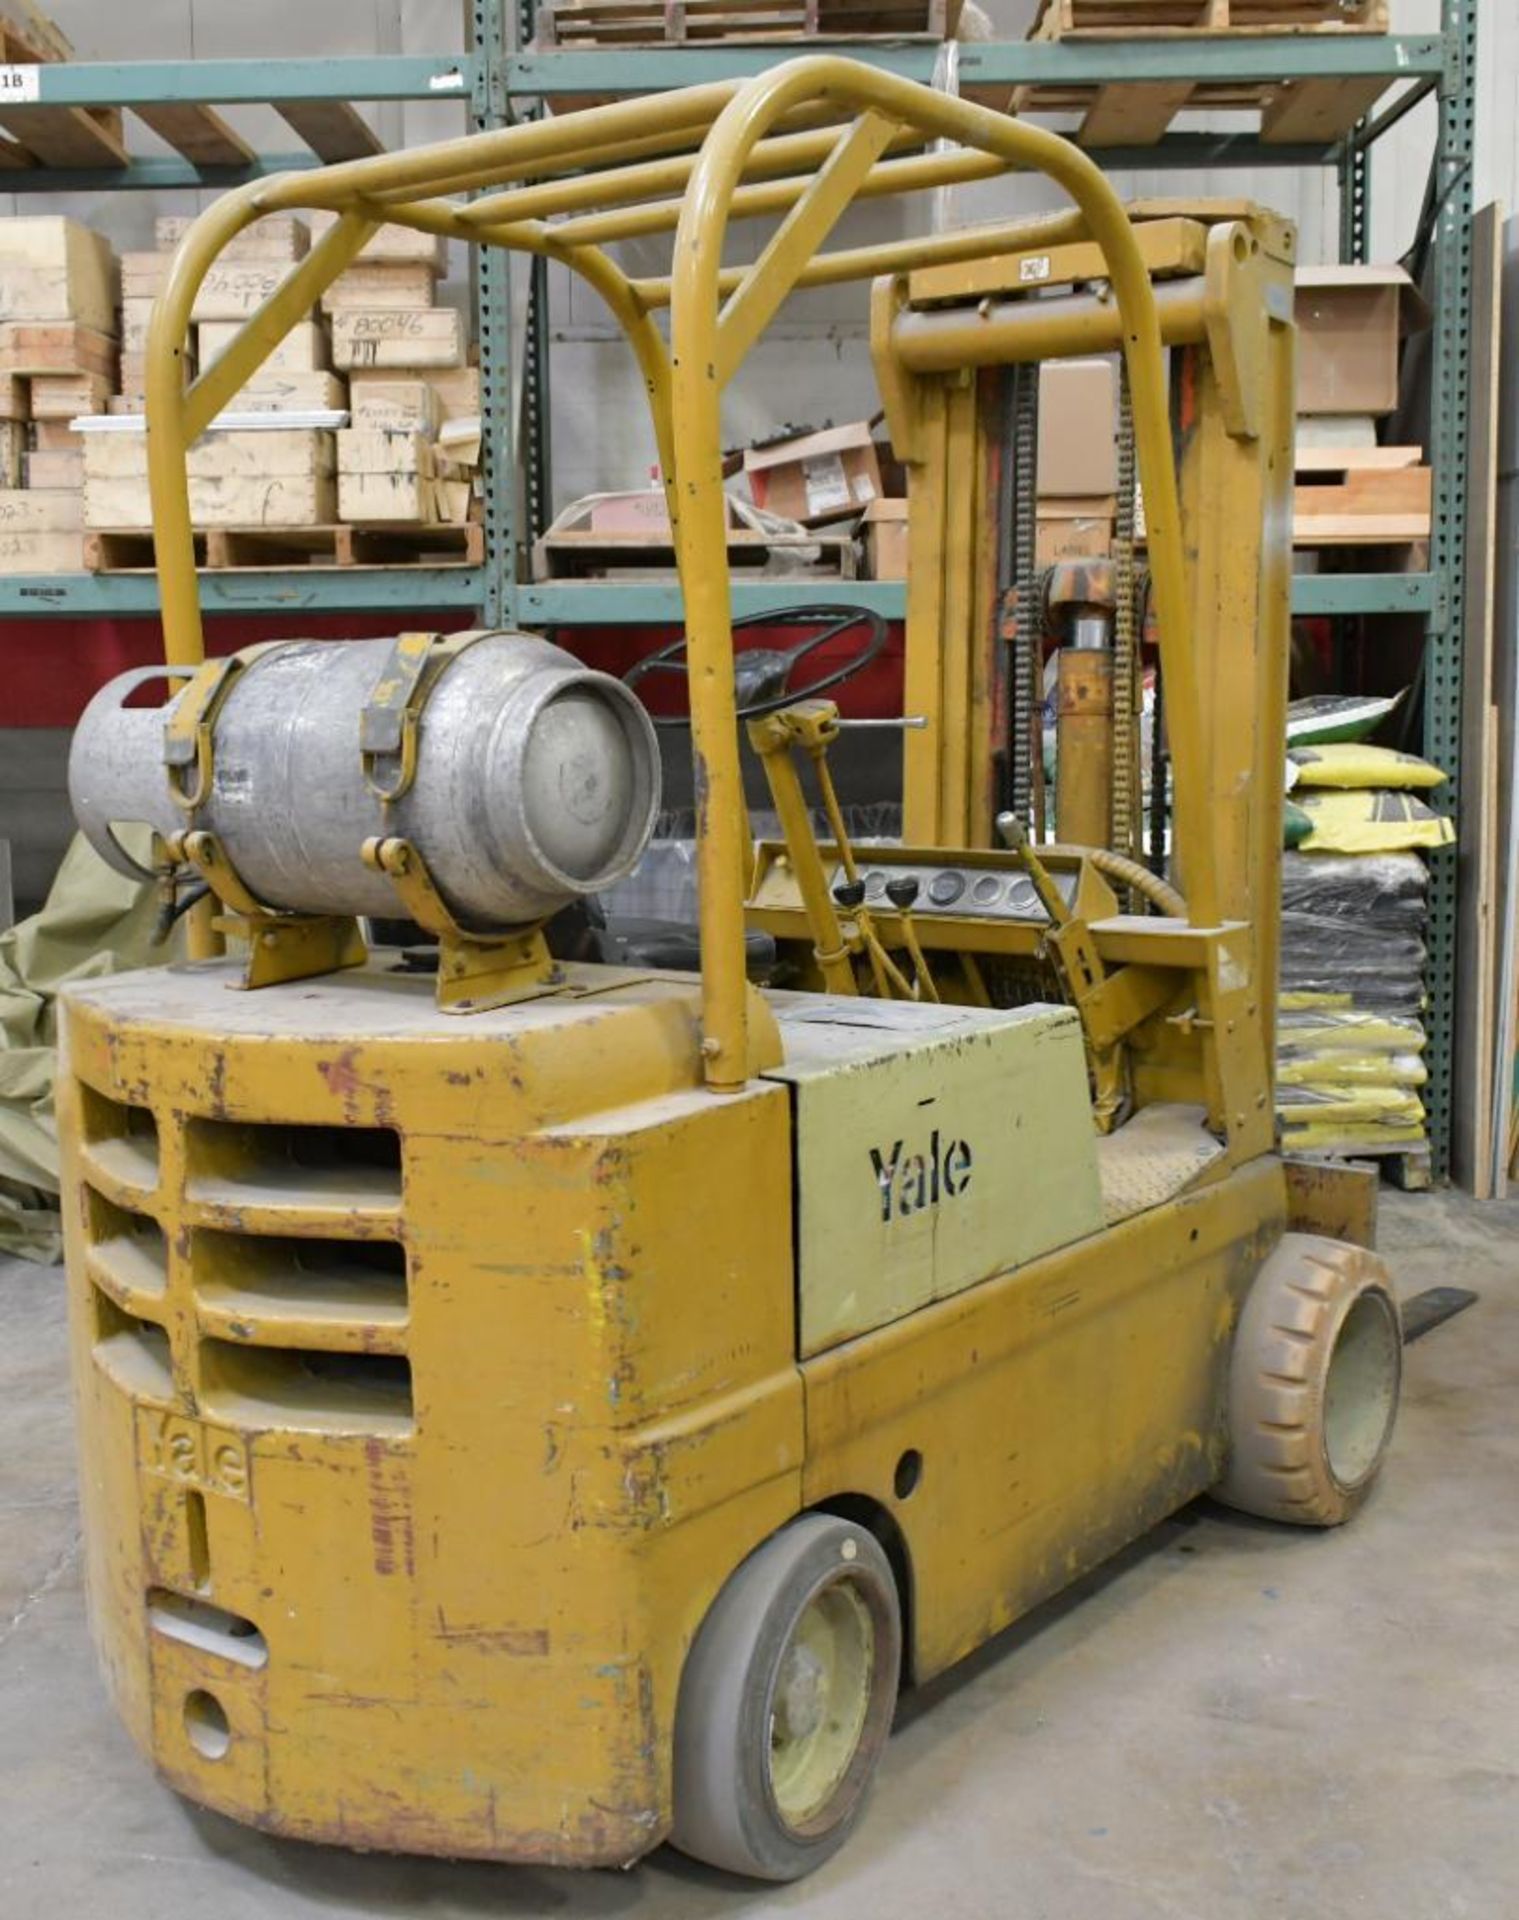 Yale Model G51C-040-NAT-077, Approximately 5,000-Lbs. x 188" Lift Capacity LP Gas Fork Lift Truck